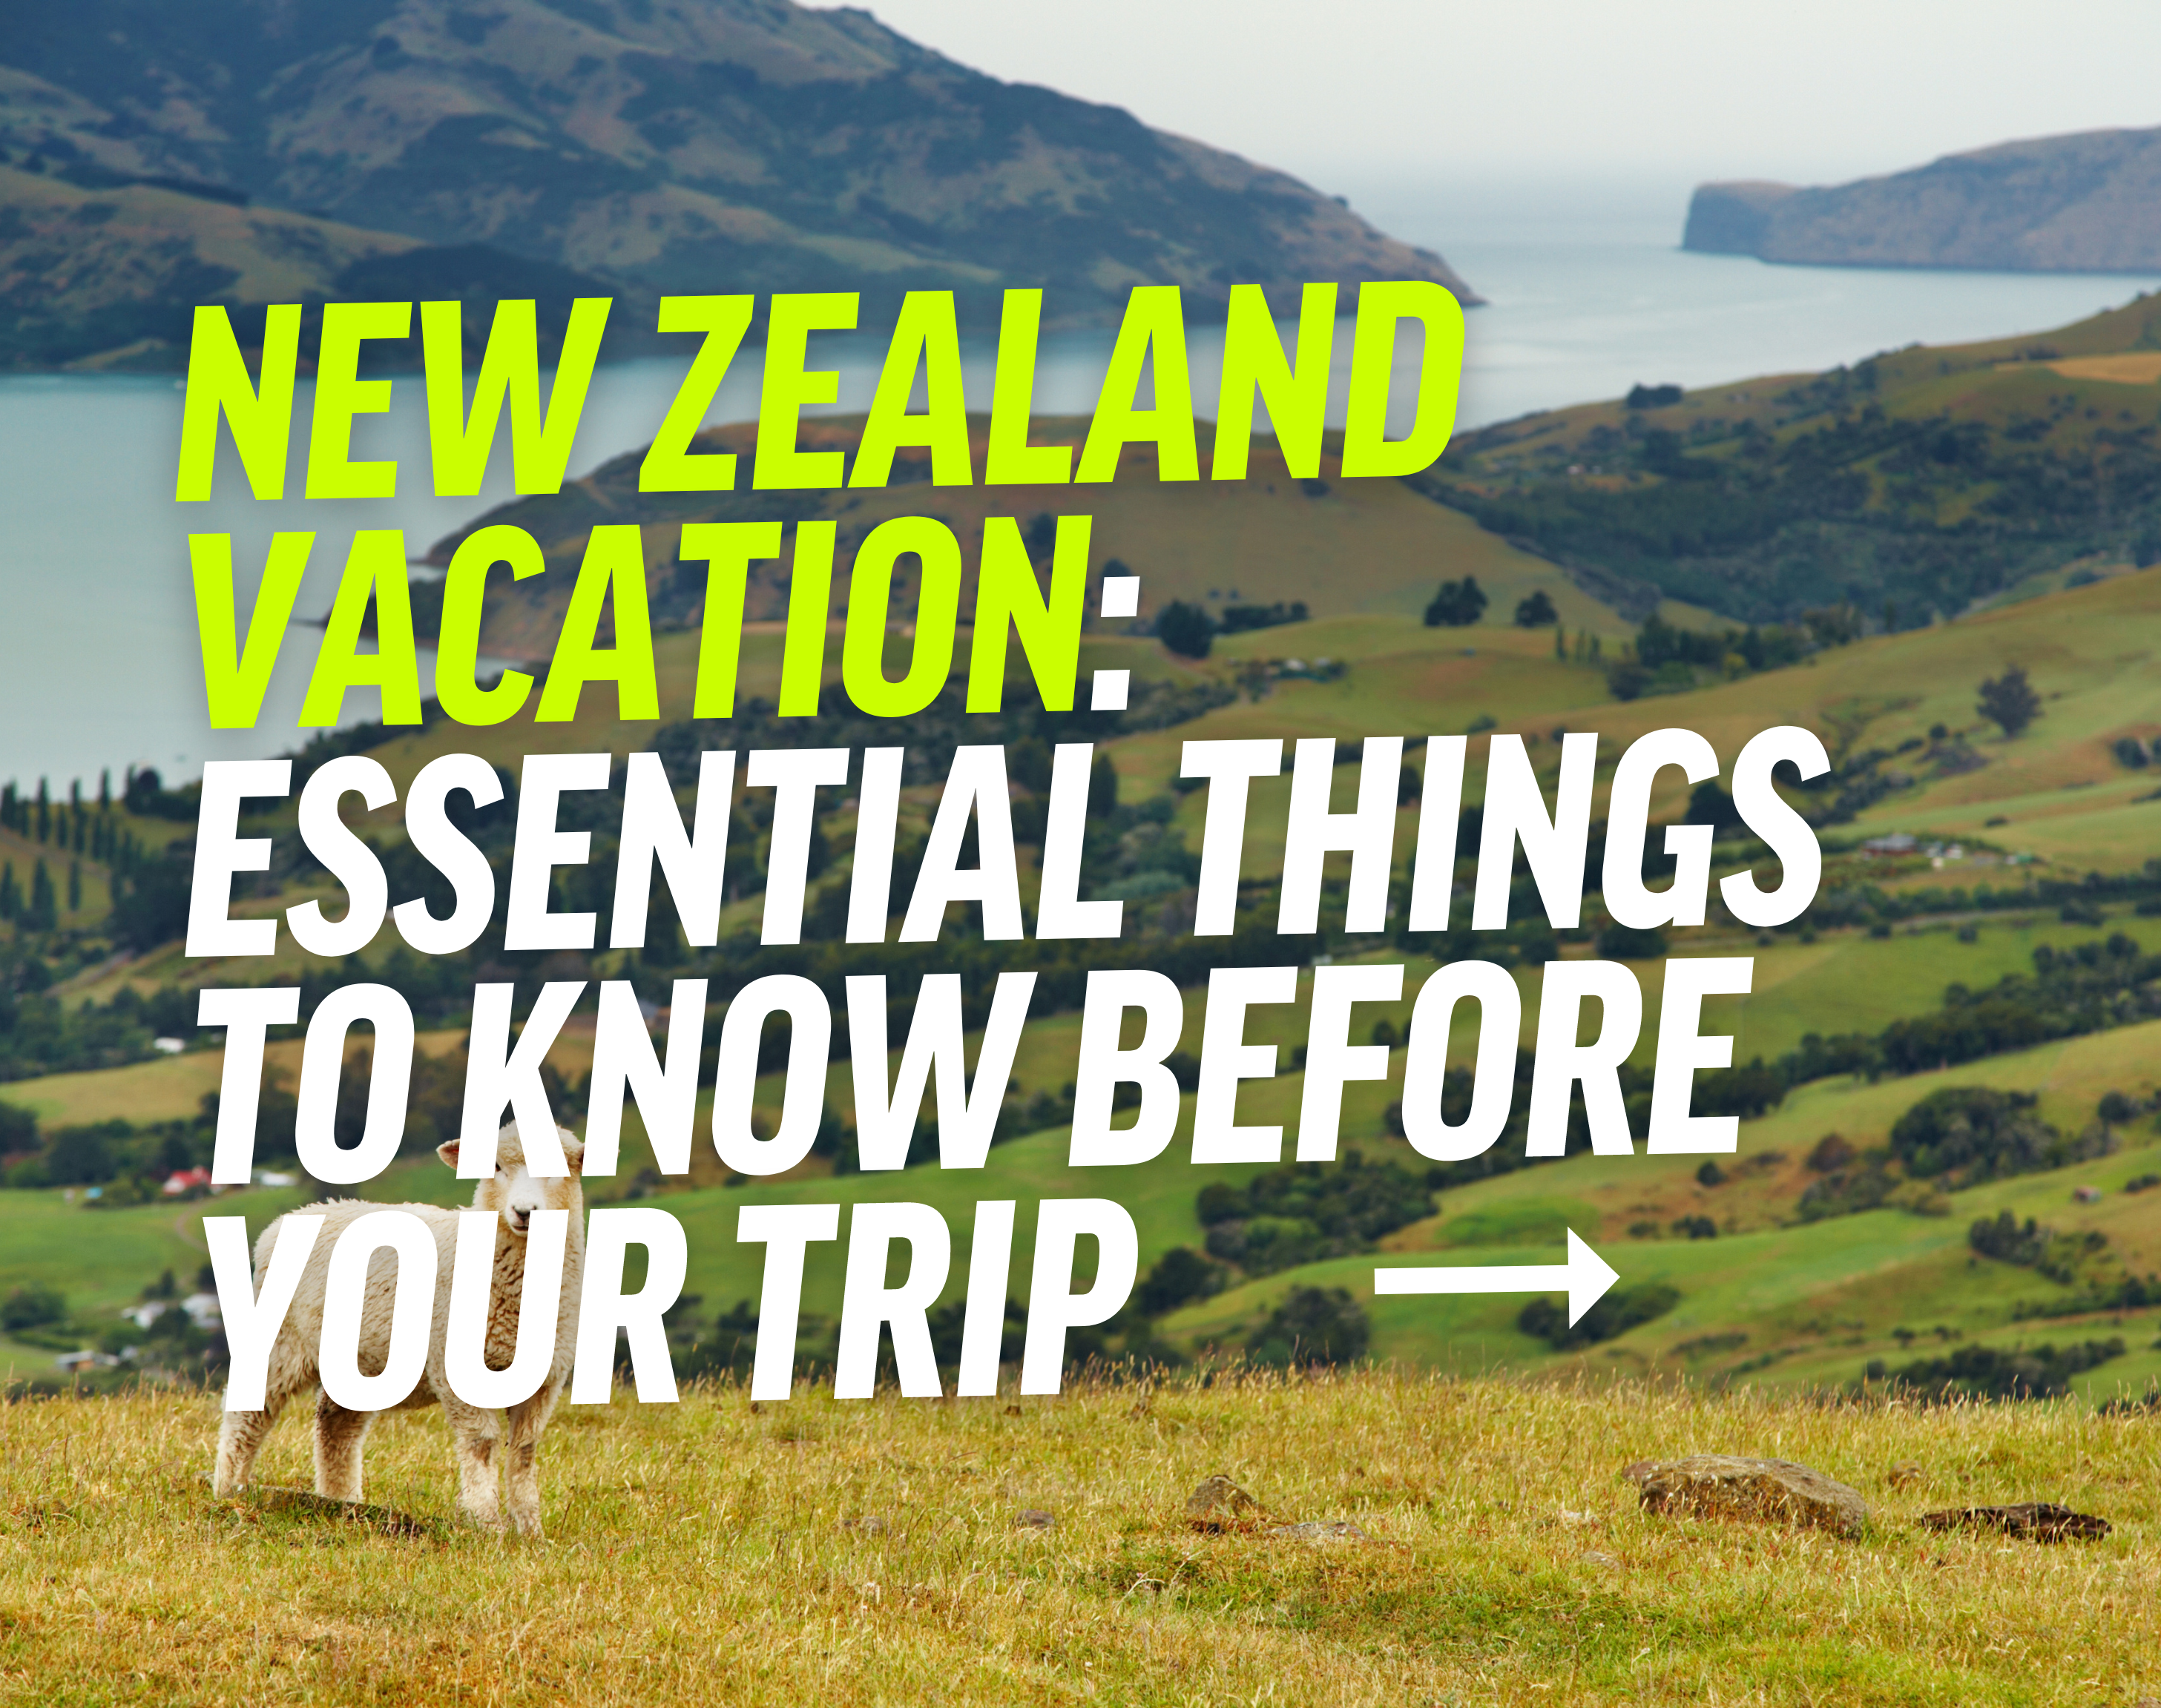 New Zealand Vacation: Essential Things to Know Before Your Trip